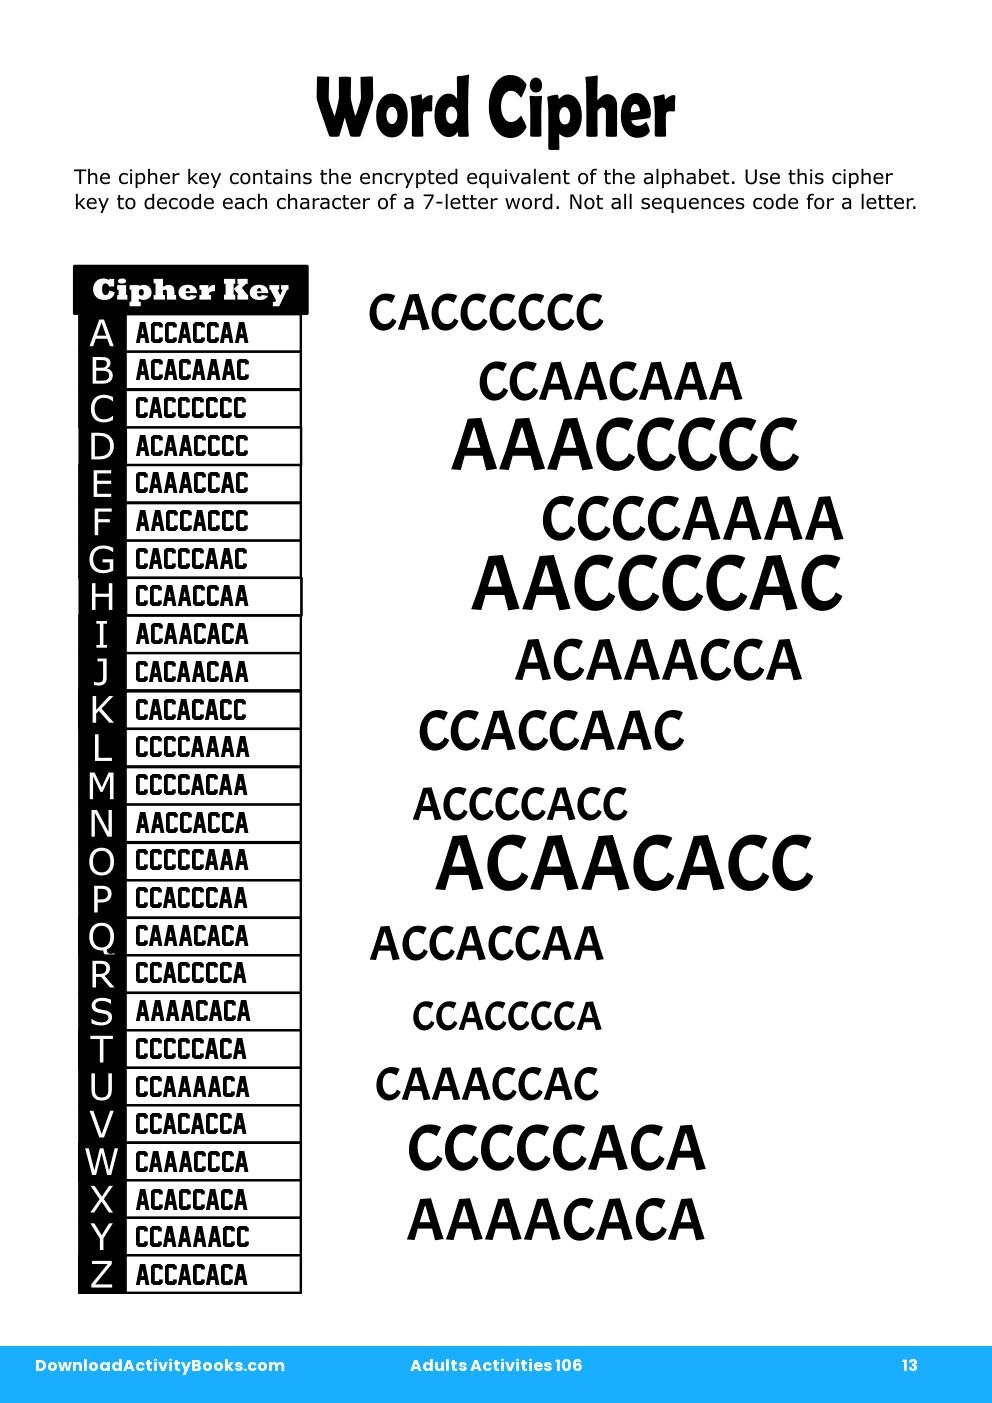 Word Cipher in Adults Activities 106